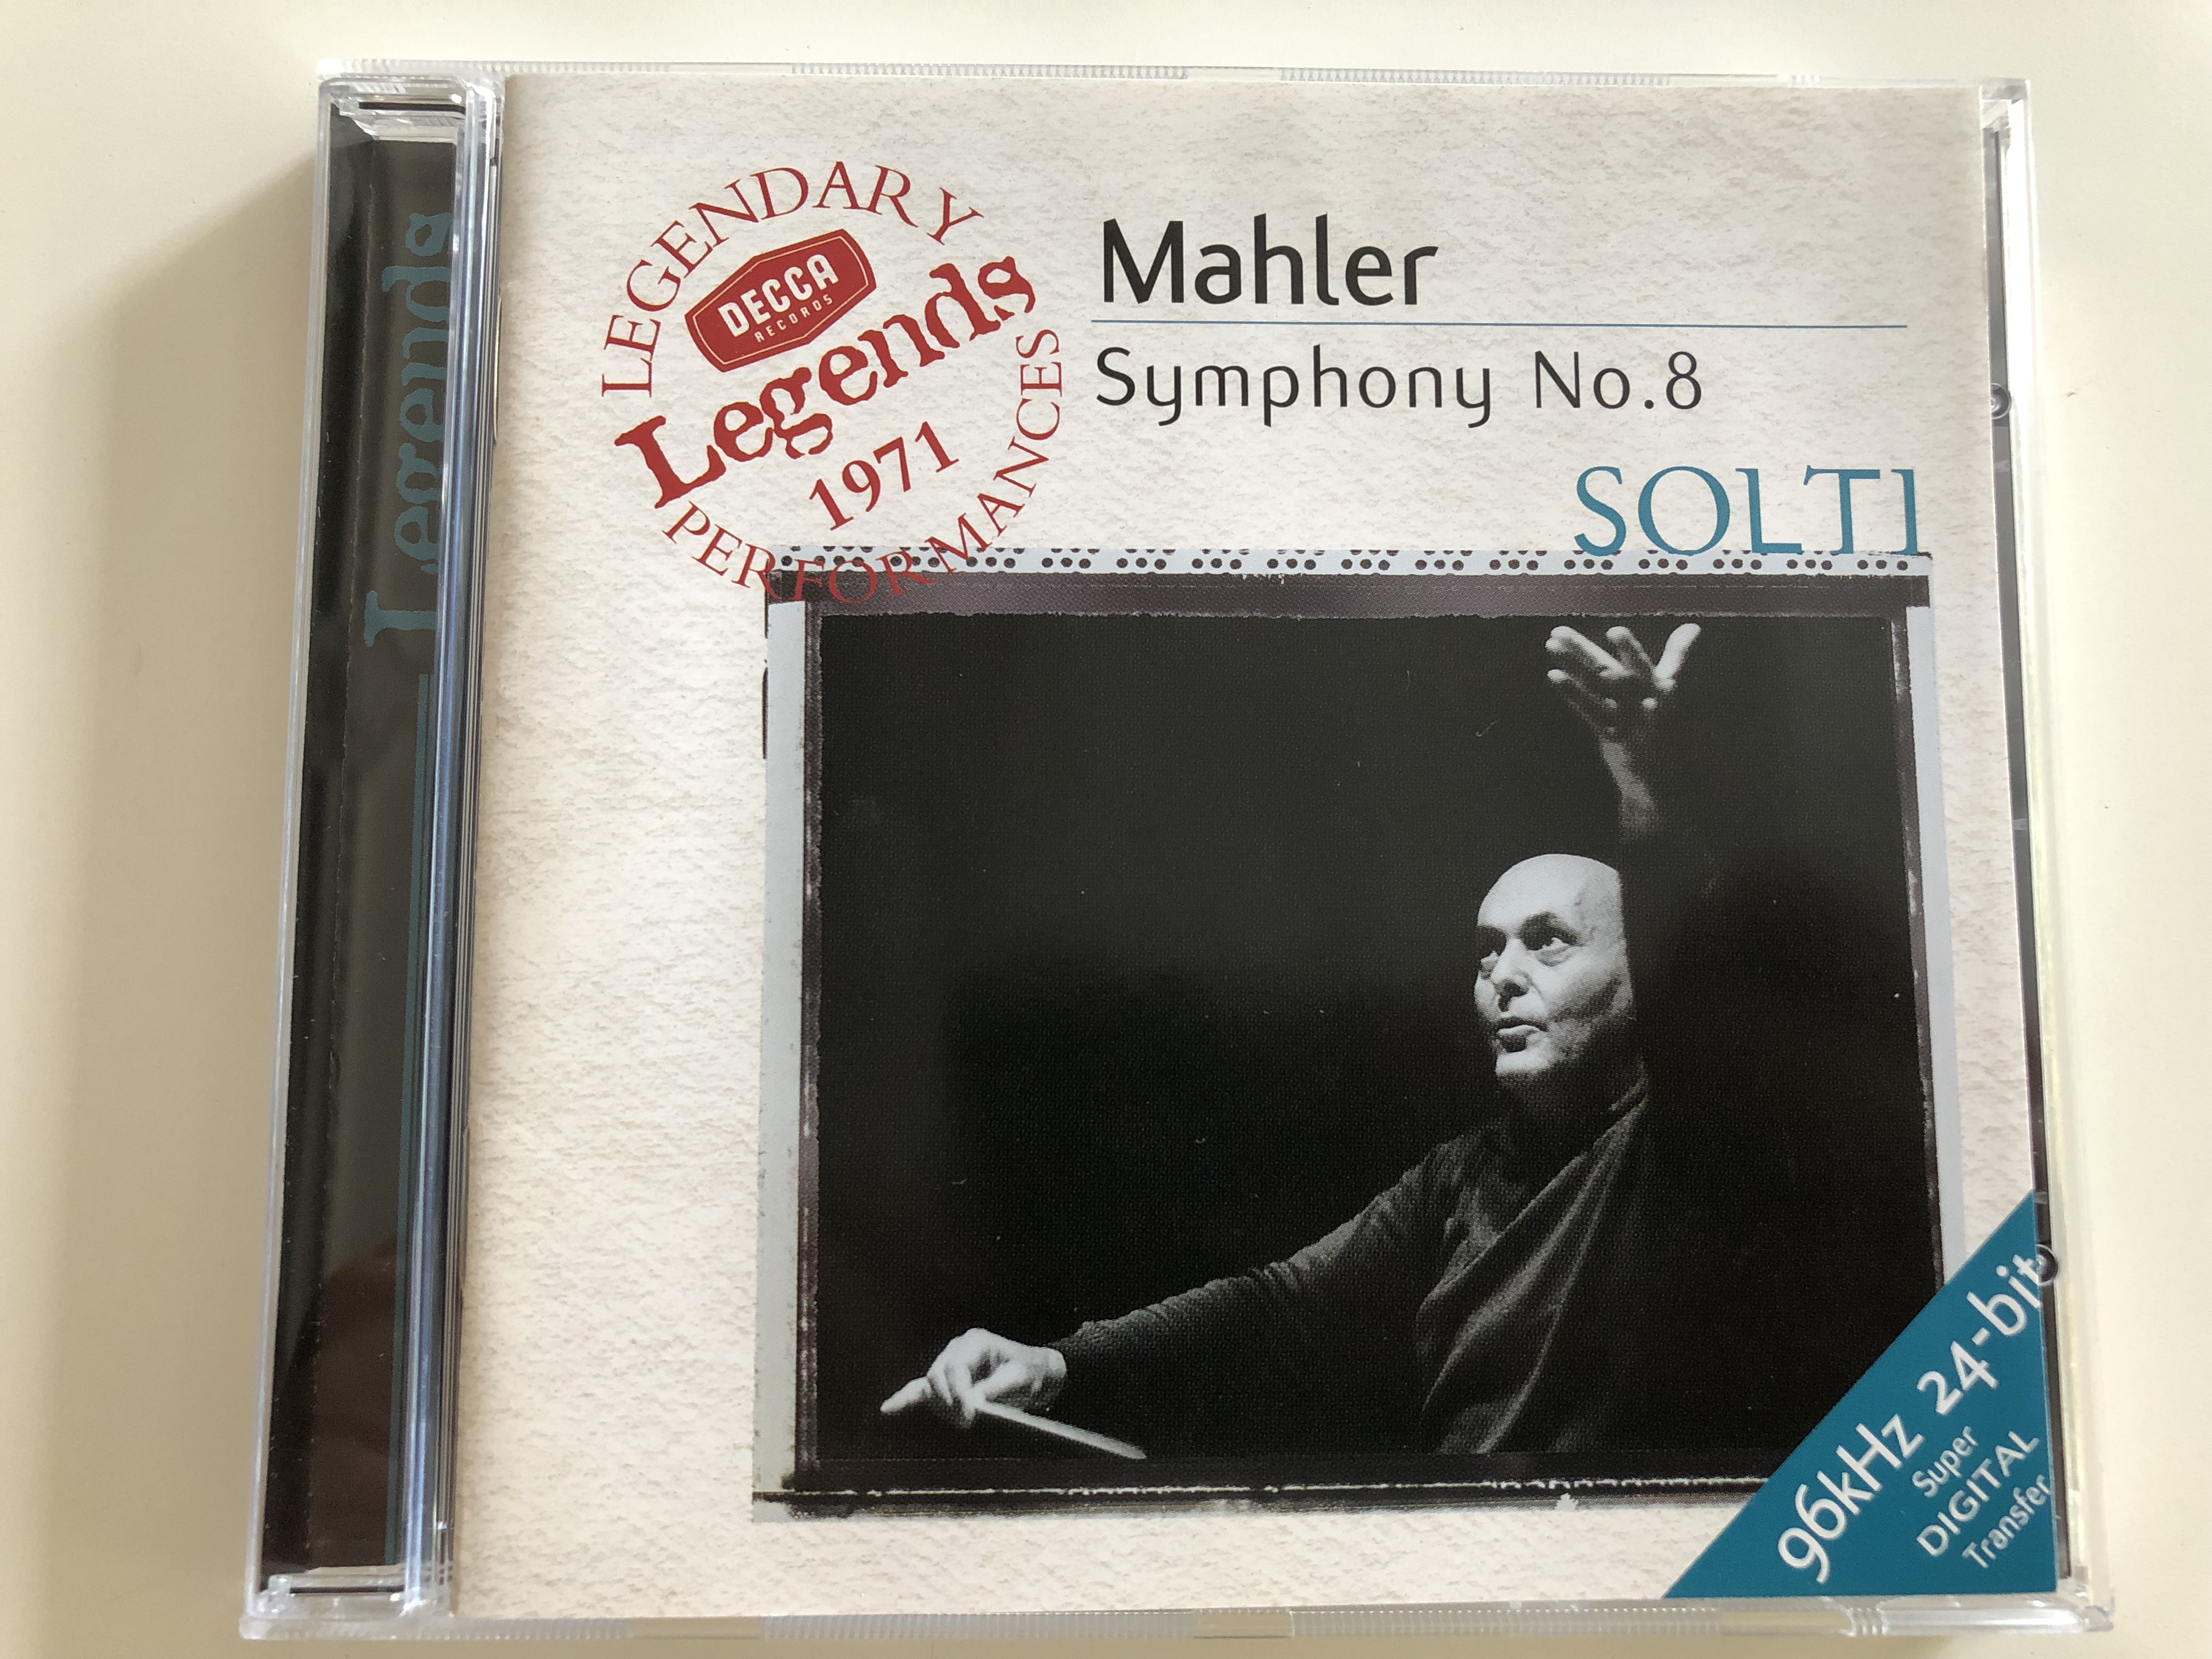 -mahler-symphony-no.-8-legendary-performances-1971-conducted-by-sir-georg-solti-decca-audio-cd-1999-py-924-1-.jpg